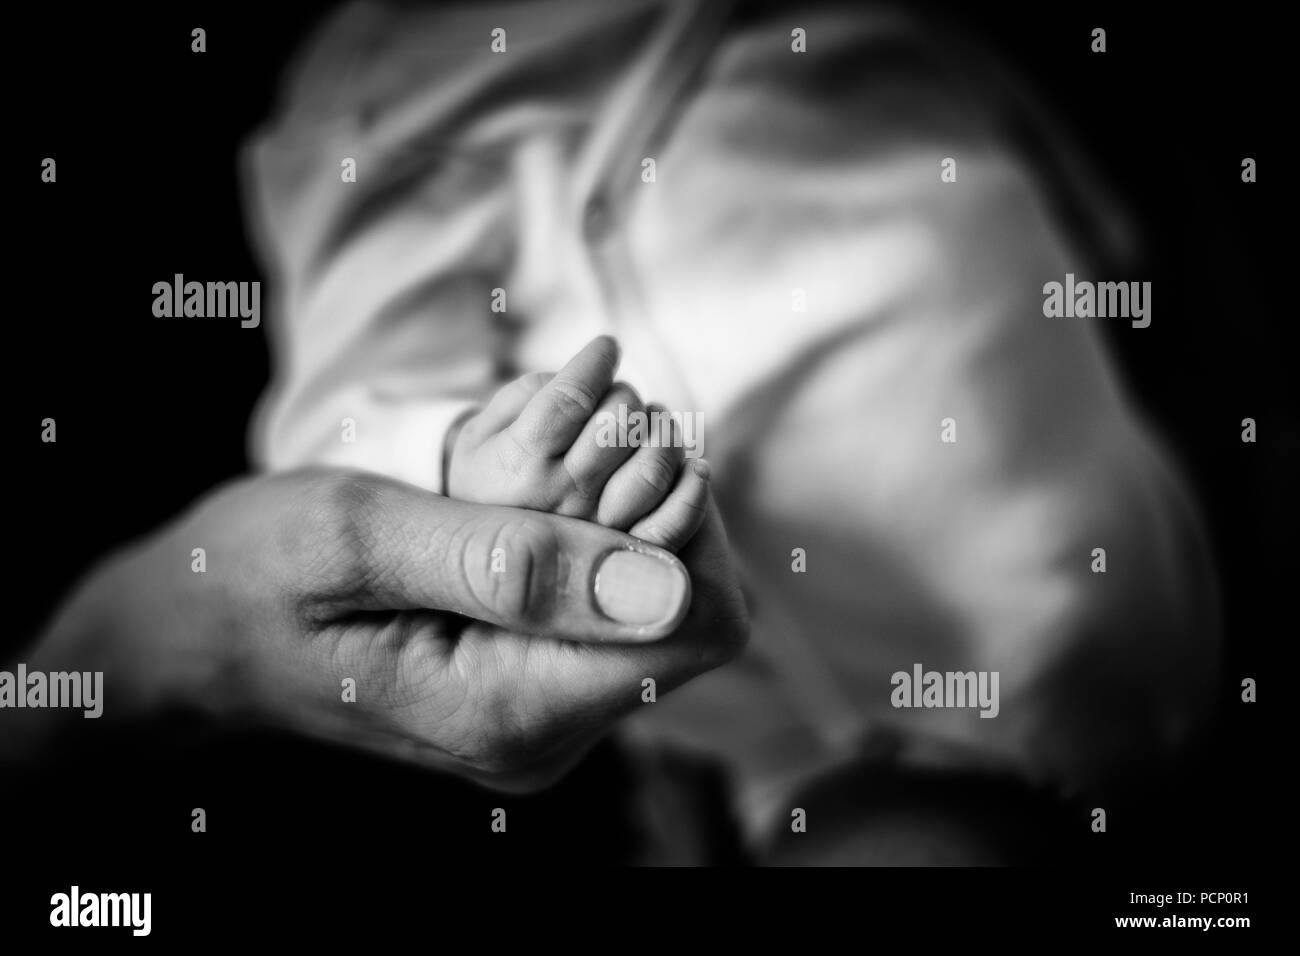 Mother holding her baby's hand, gentle, tender, close-up, detail, background out of focus, b/w Stock Photo